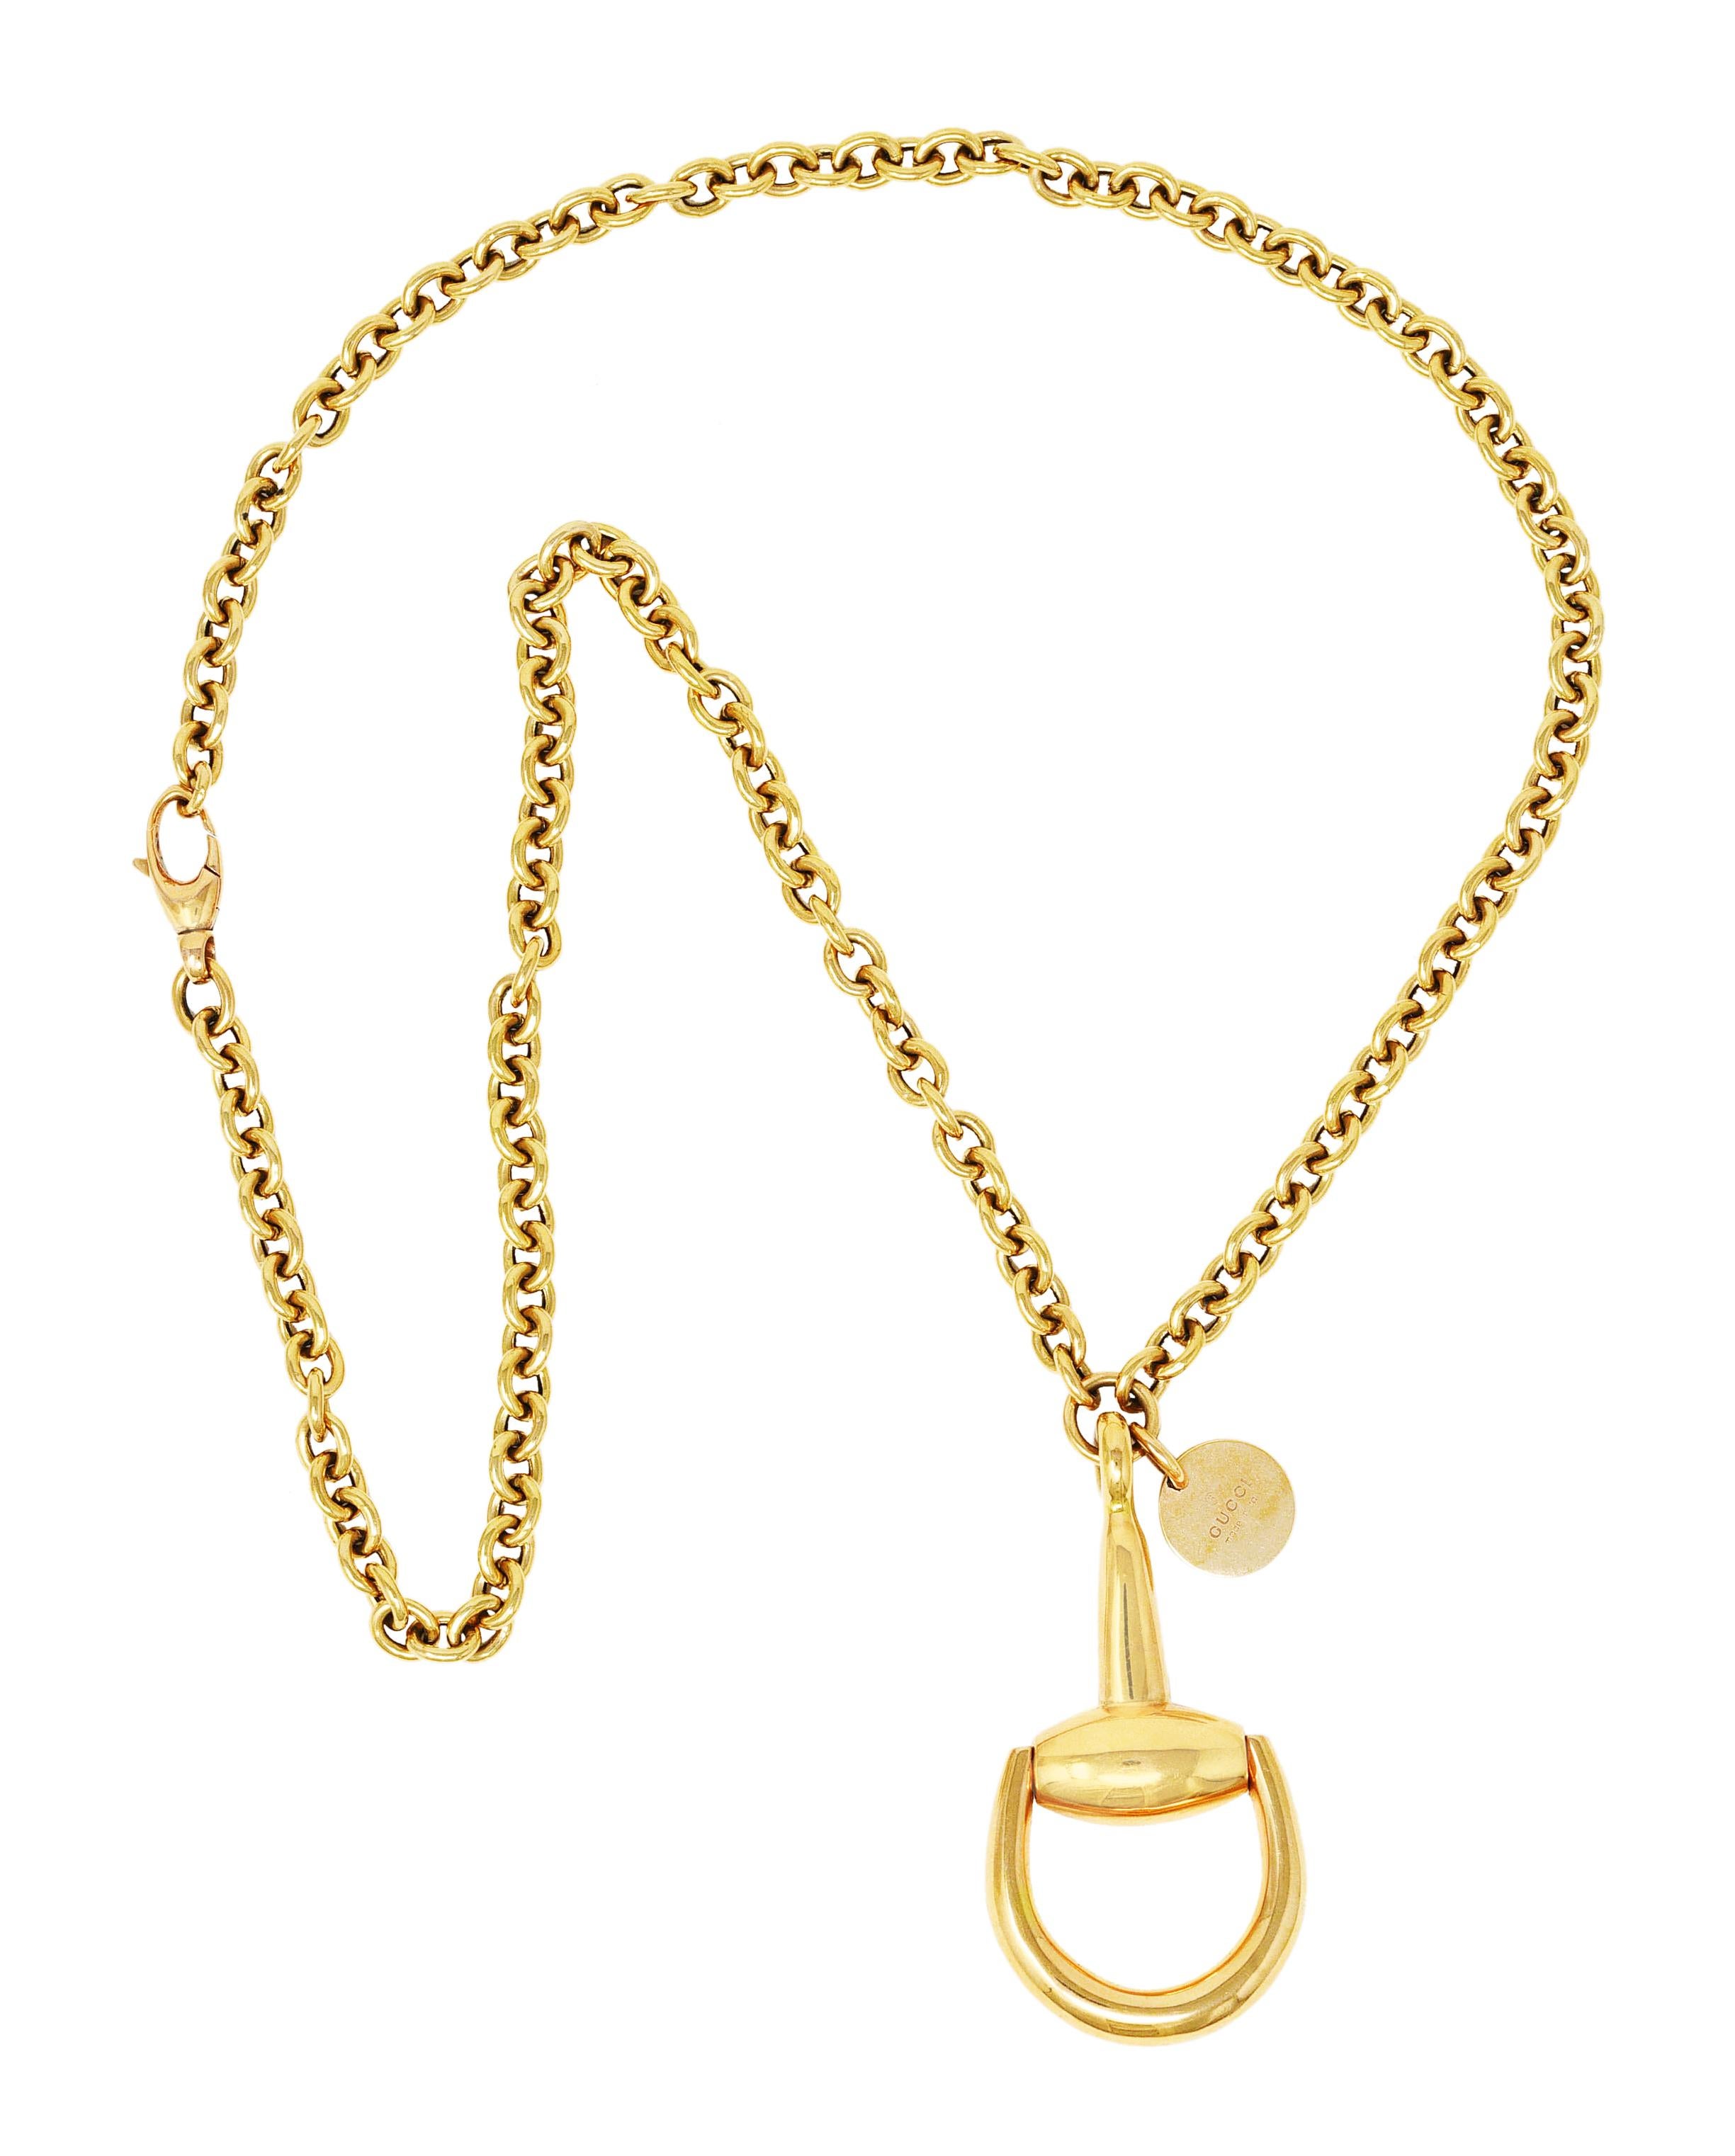 Necklace is designed as cable chain suspending a large horsebit motif pendant. With a hinged loop and a high polished finish. Accented by logo tag. Completed by lobster clasp closure. Stamped AU750 for 18 karat gold. Fully signed Gucci, Made in